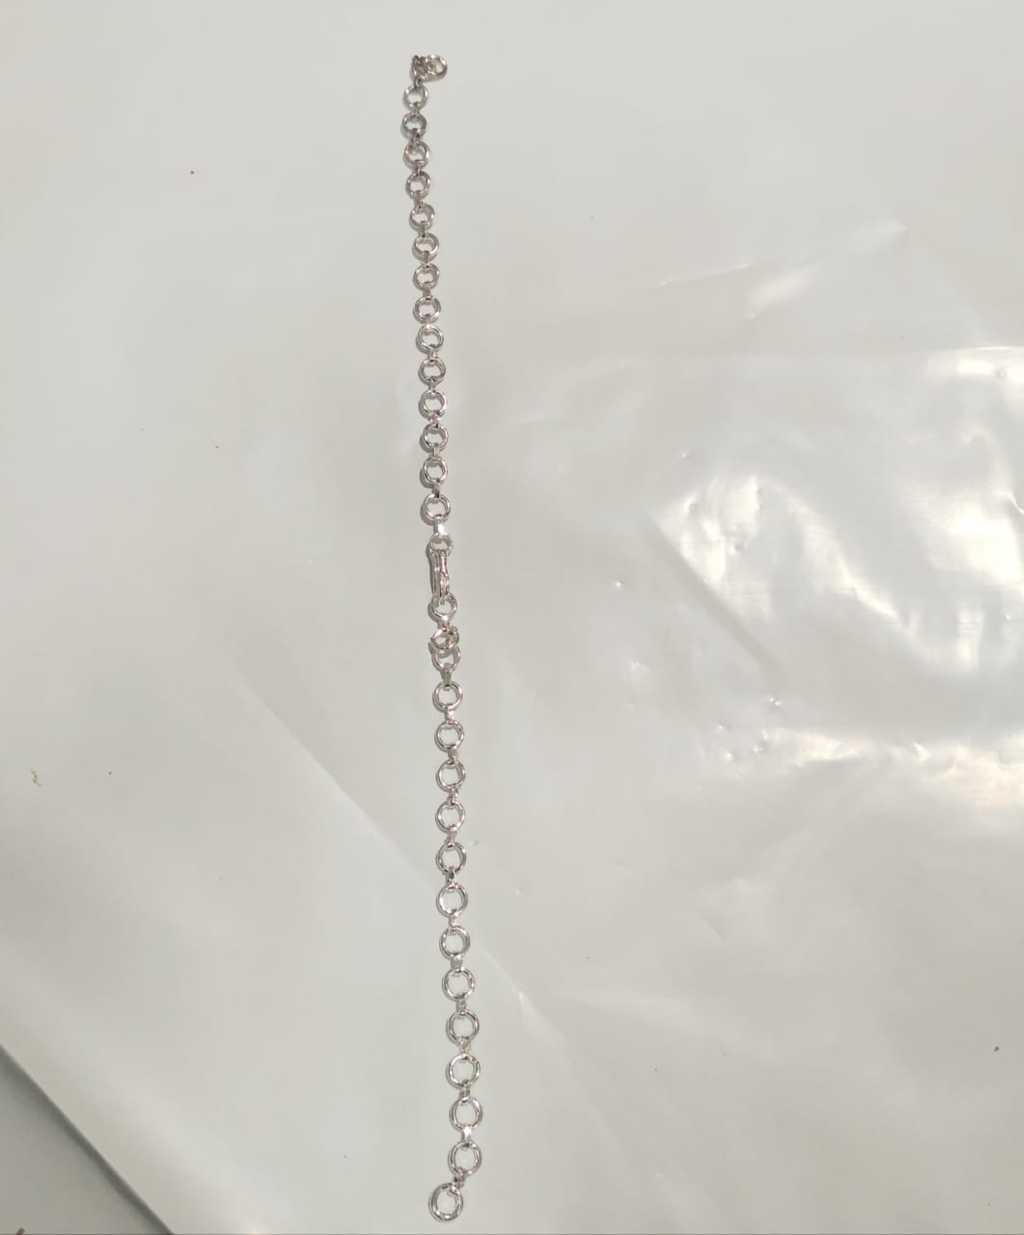 Additional back-Chain for necklace